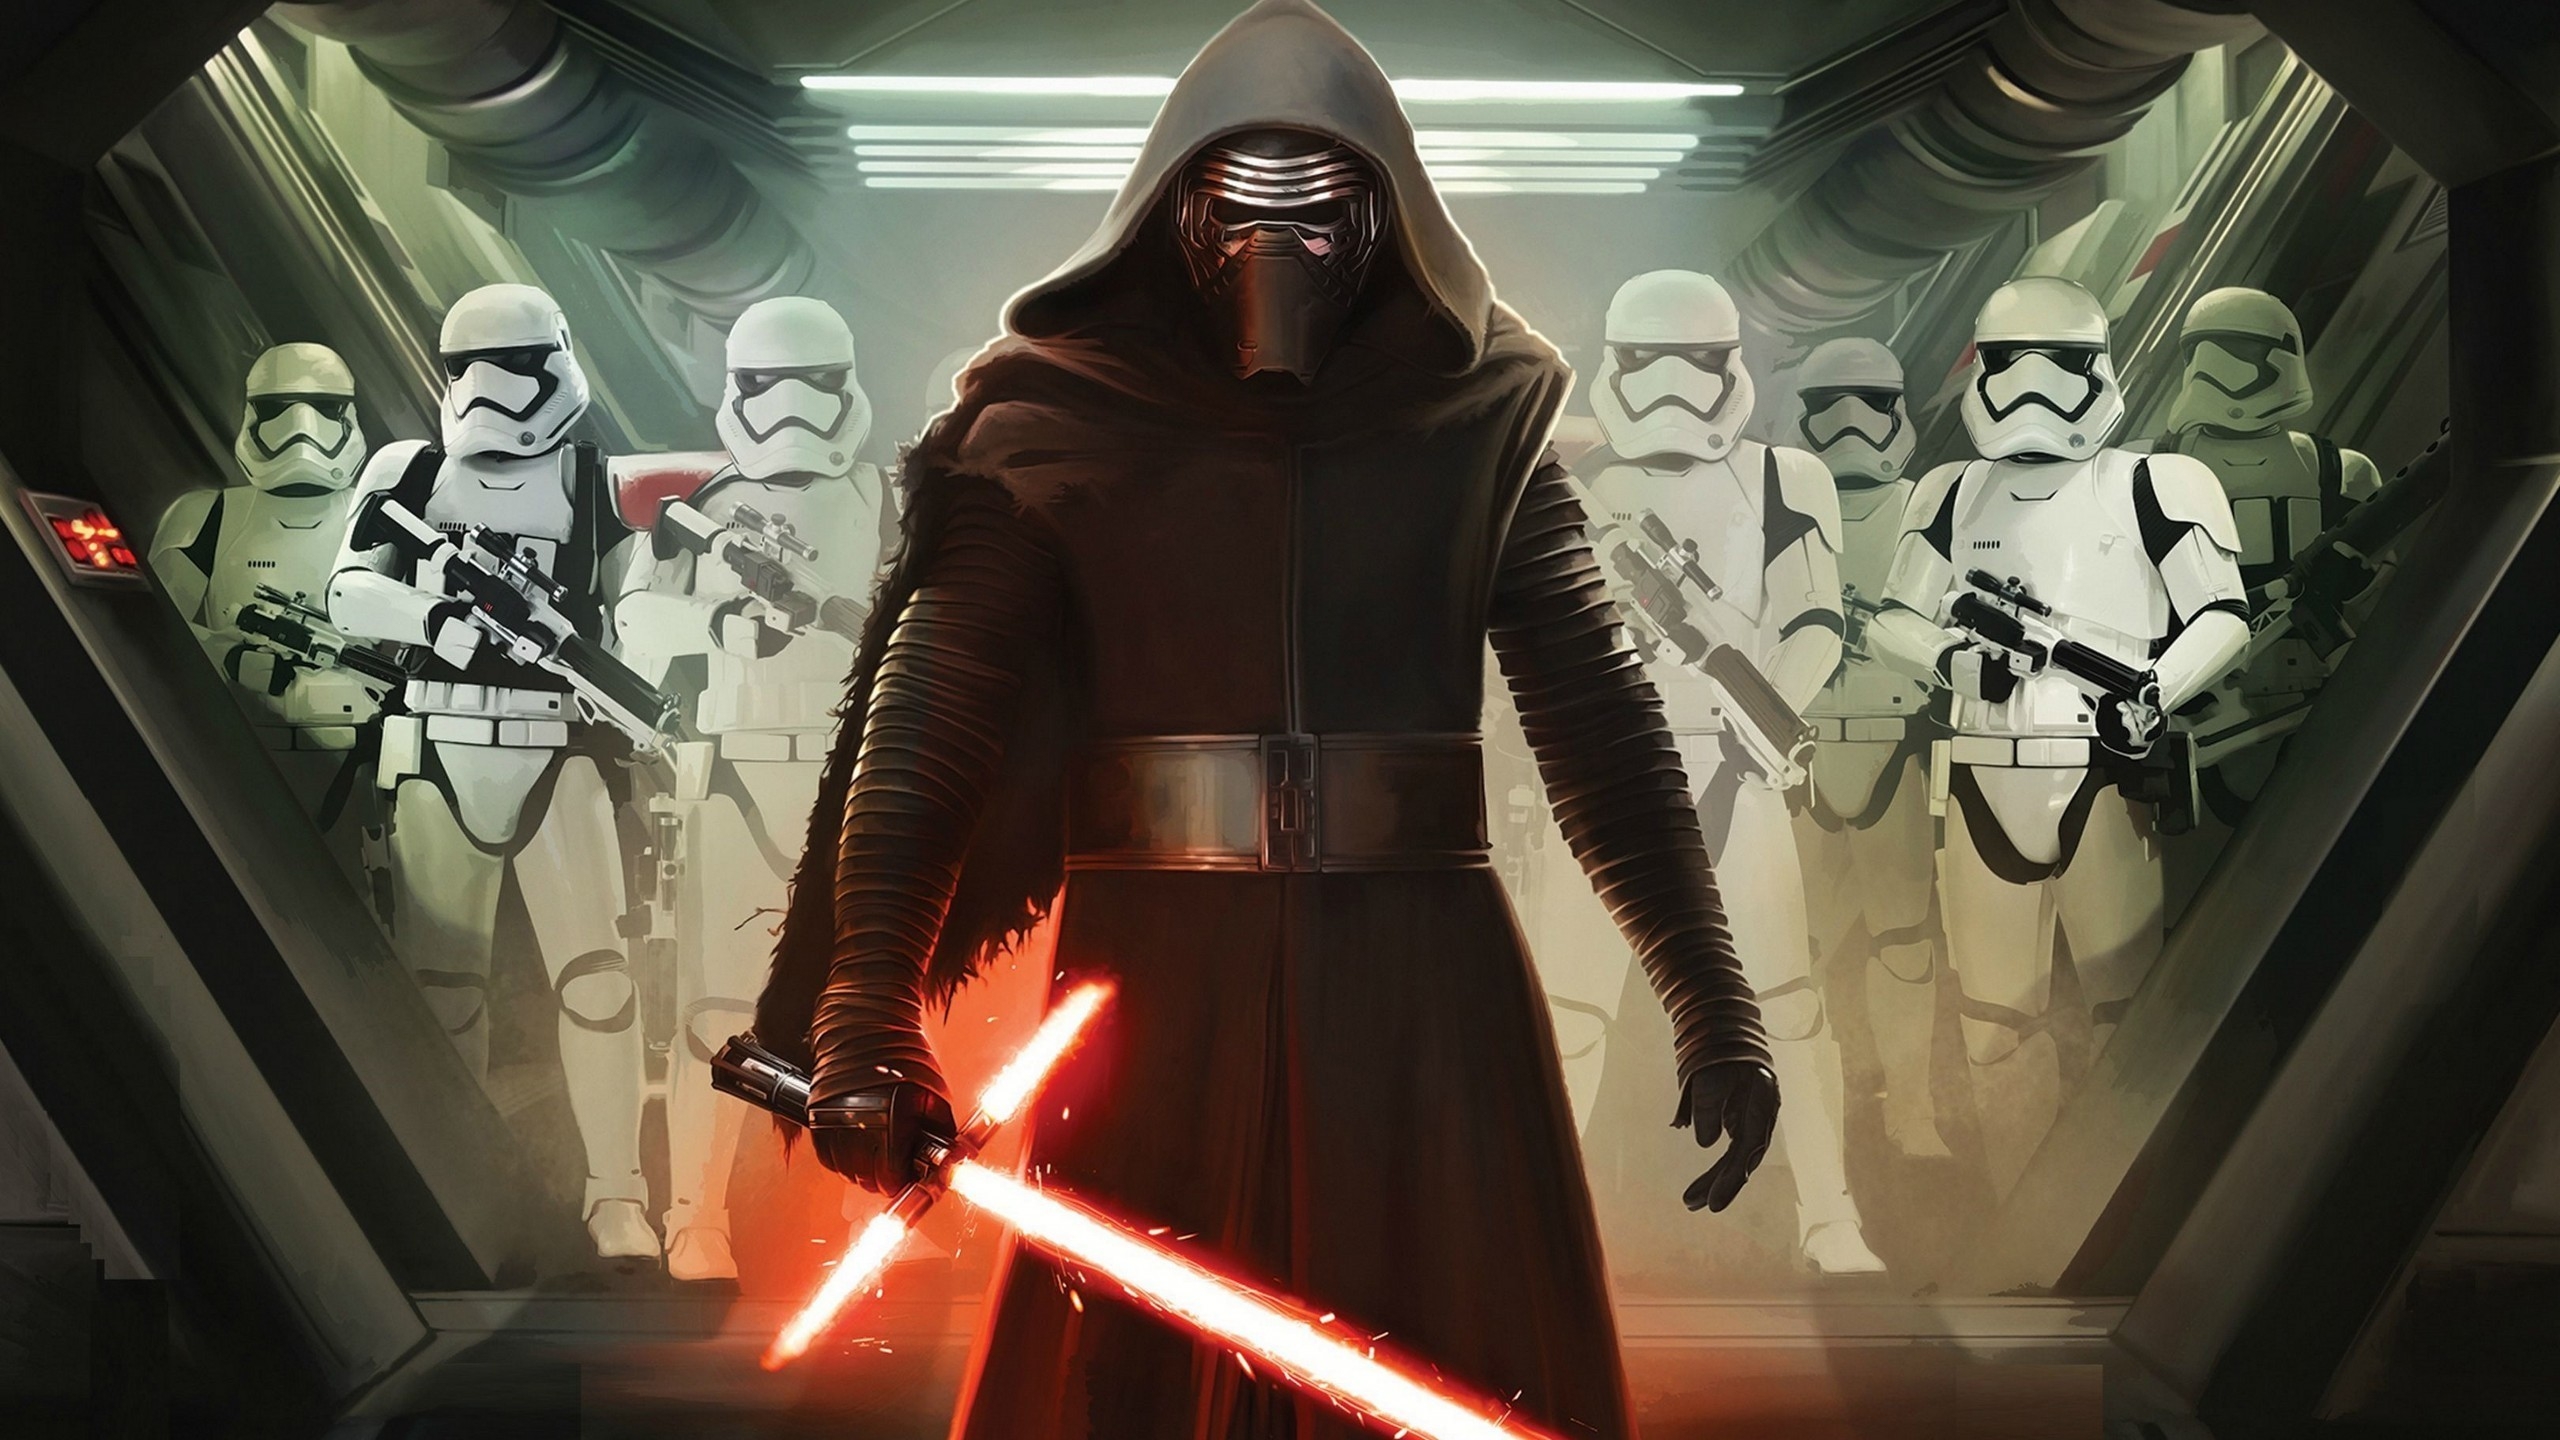 Star Wars VII Darth Vader and Storm Troopers for 2560x1440 HDTV resolution